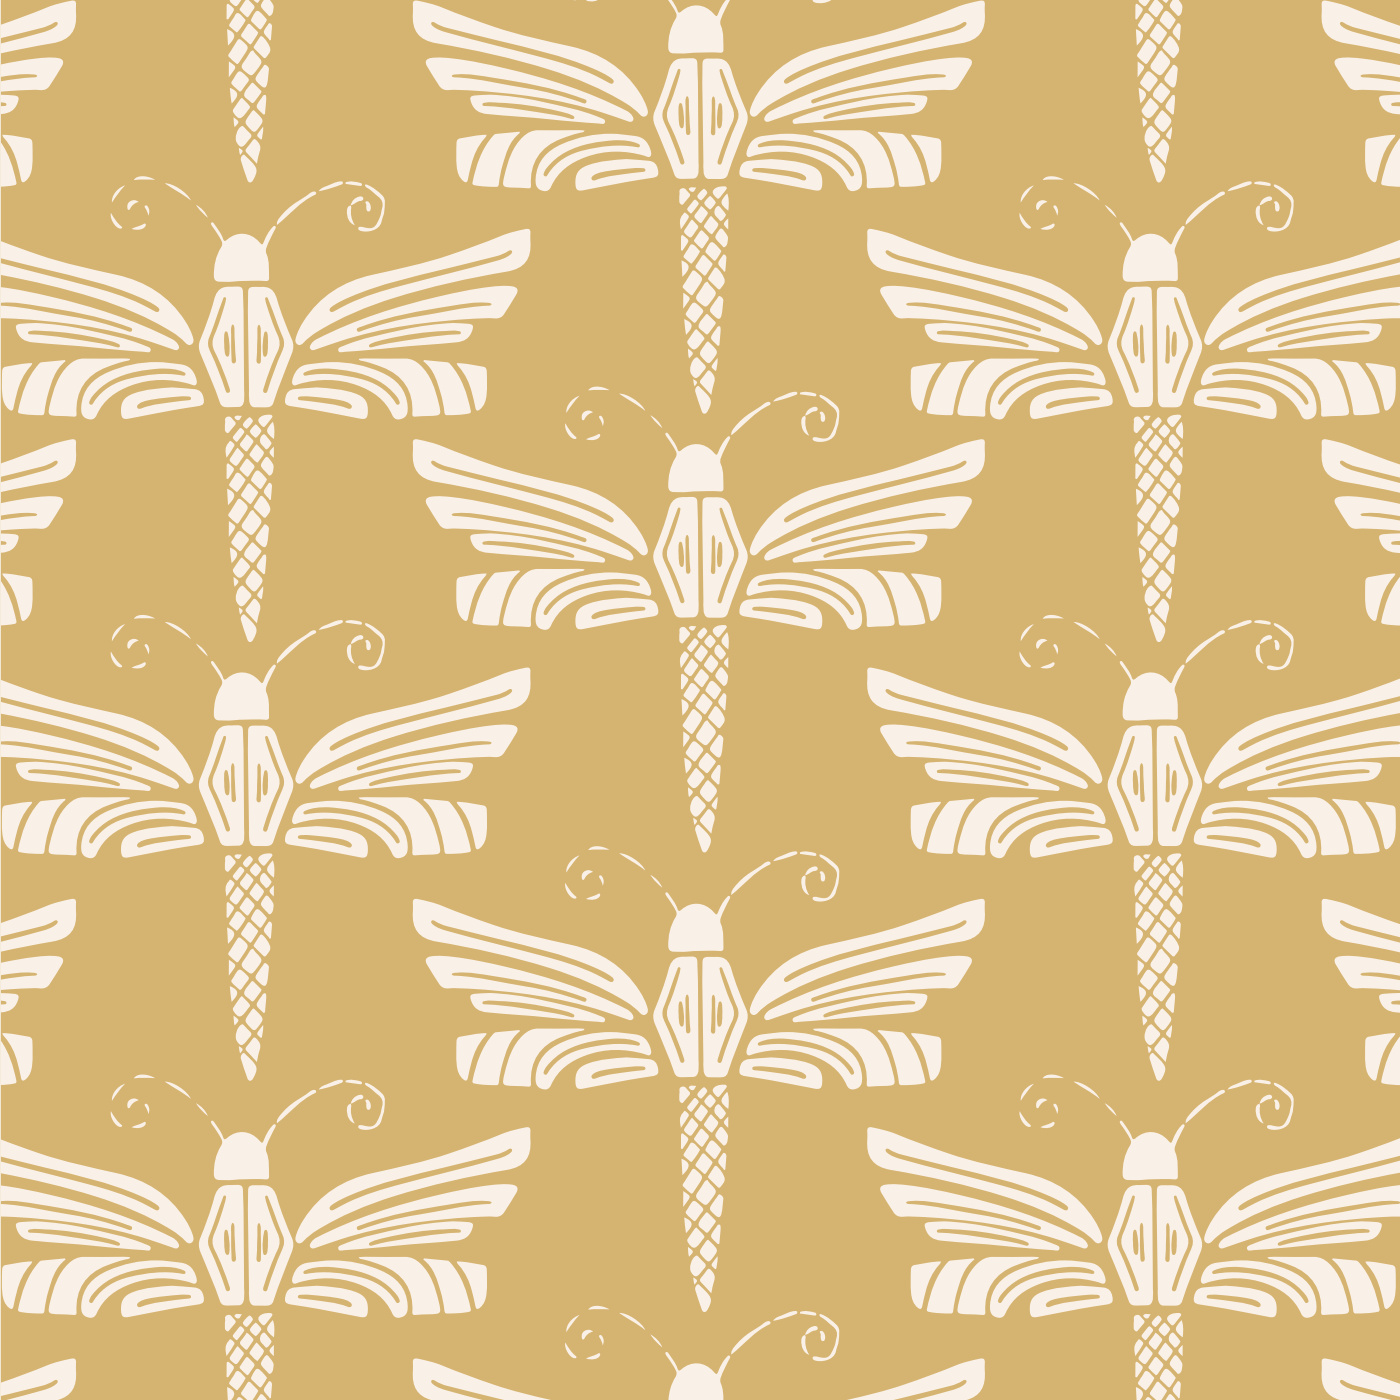 Dragonfly Stamp Wallpaper